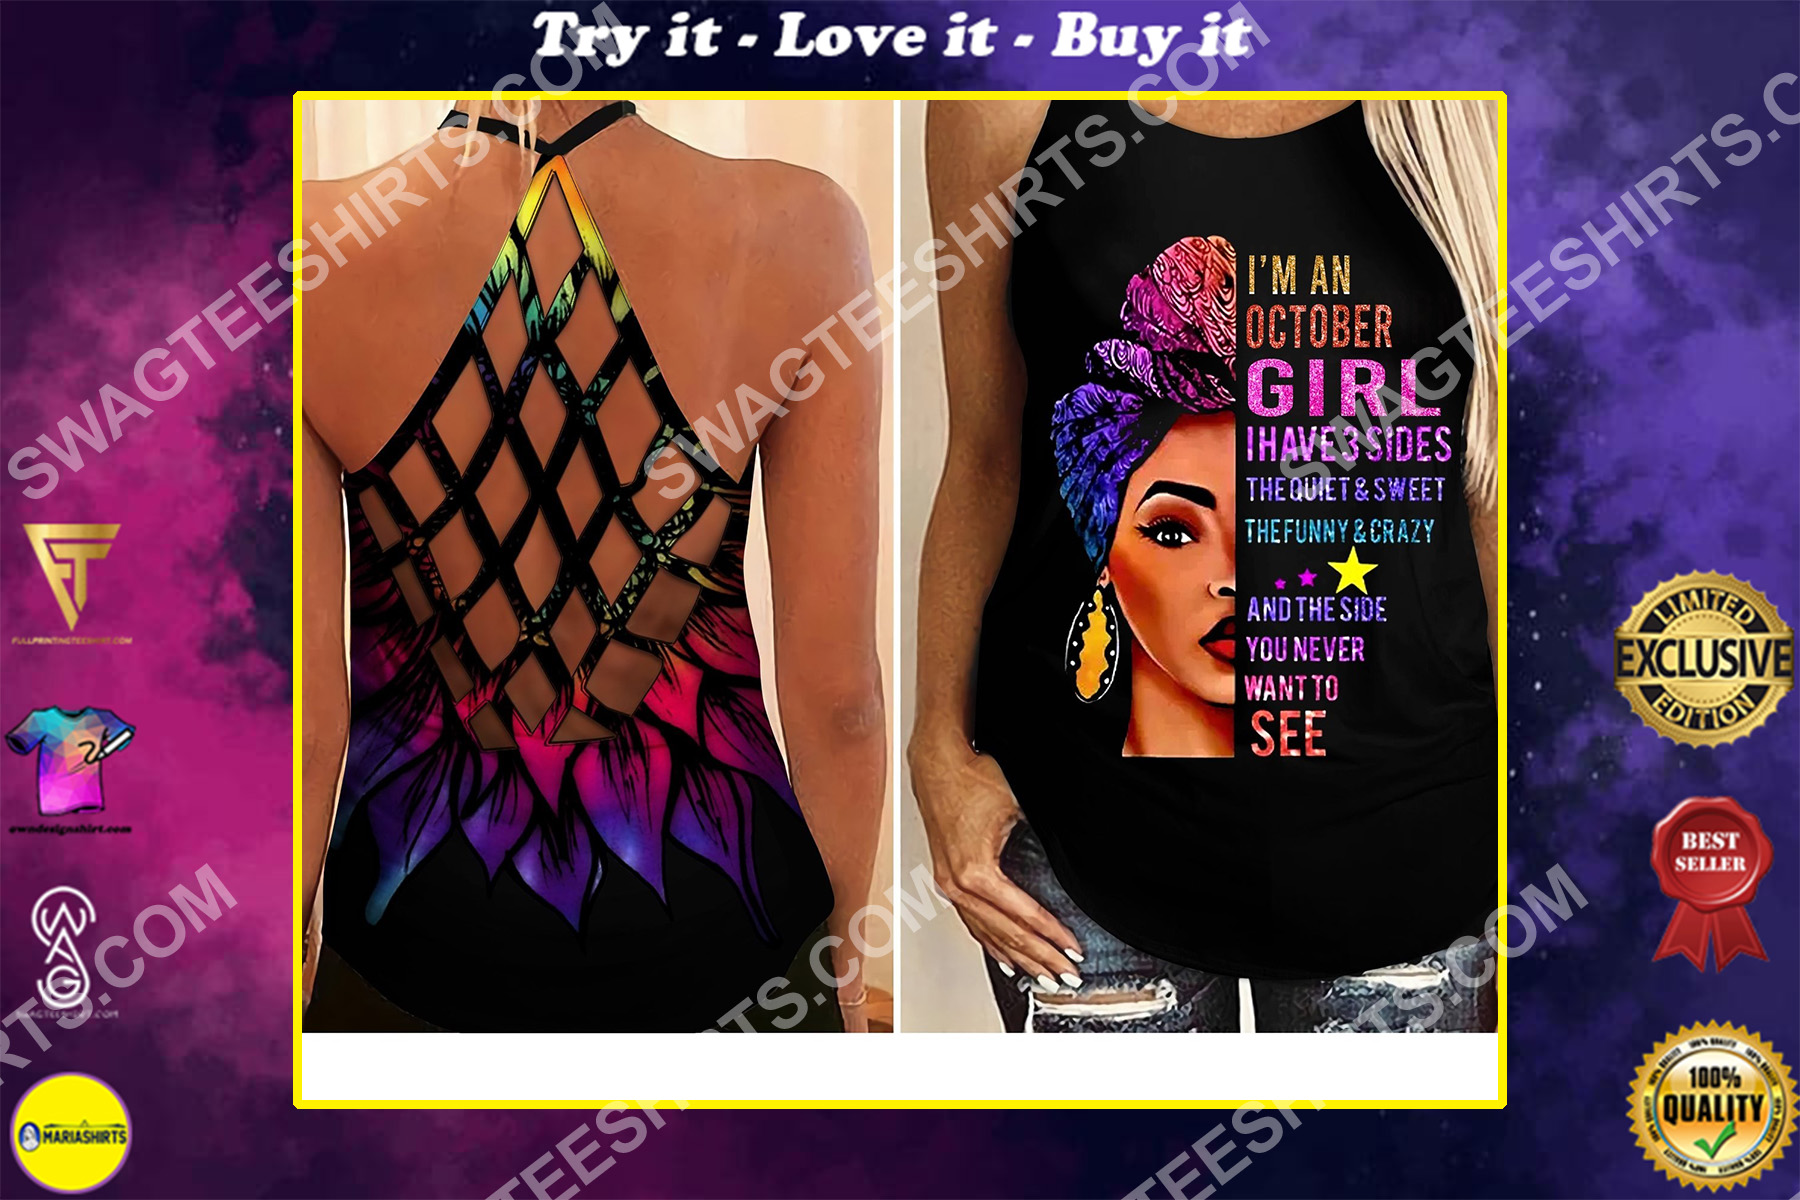 i'm an october girl i have 3 sides the quiet and sweet all over printed criss-cross tank top